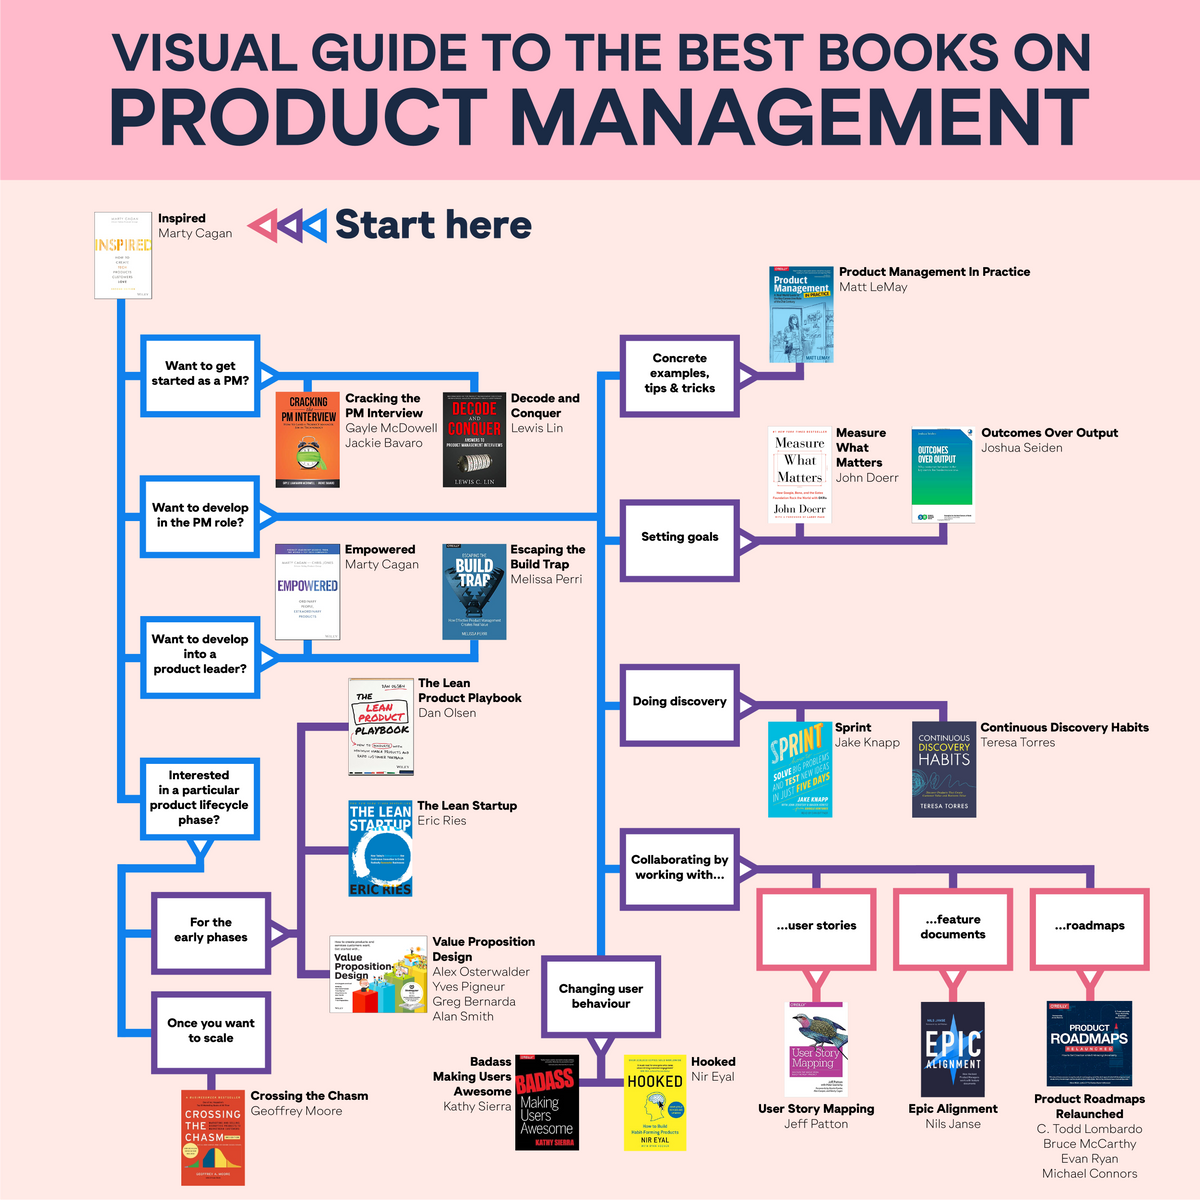 The Product Management Book that will change your career: 22 Essential Product Management Books for 2023